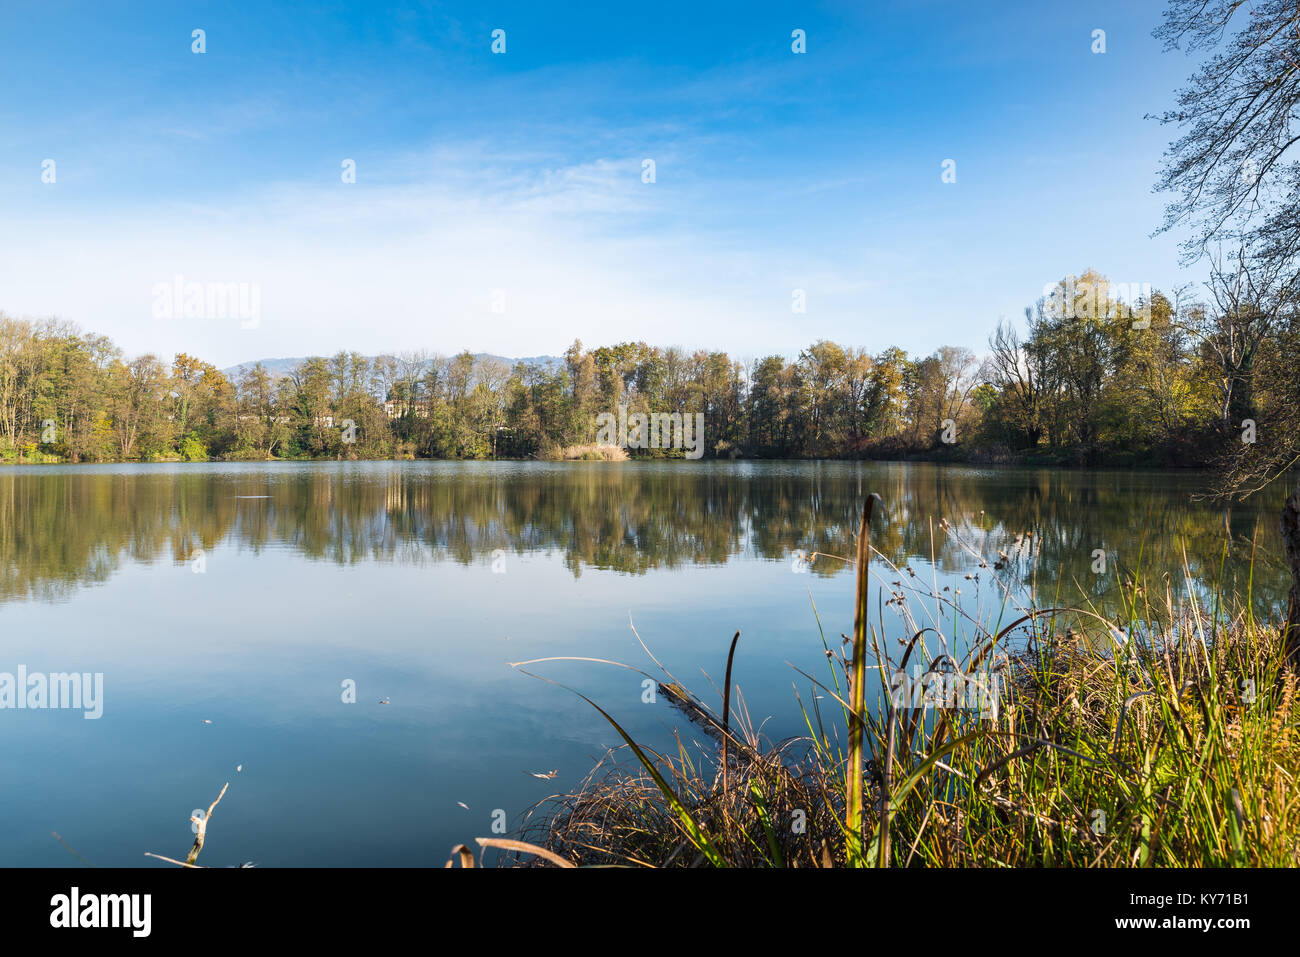 Small lake called pond or quarry of the Furnaces at the nature reserve Brabbia marsh, province of Varese, Italy Stock Photo